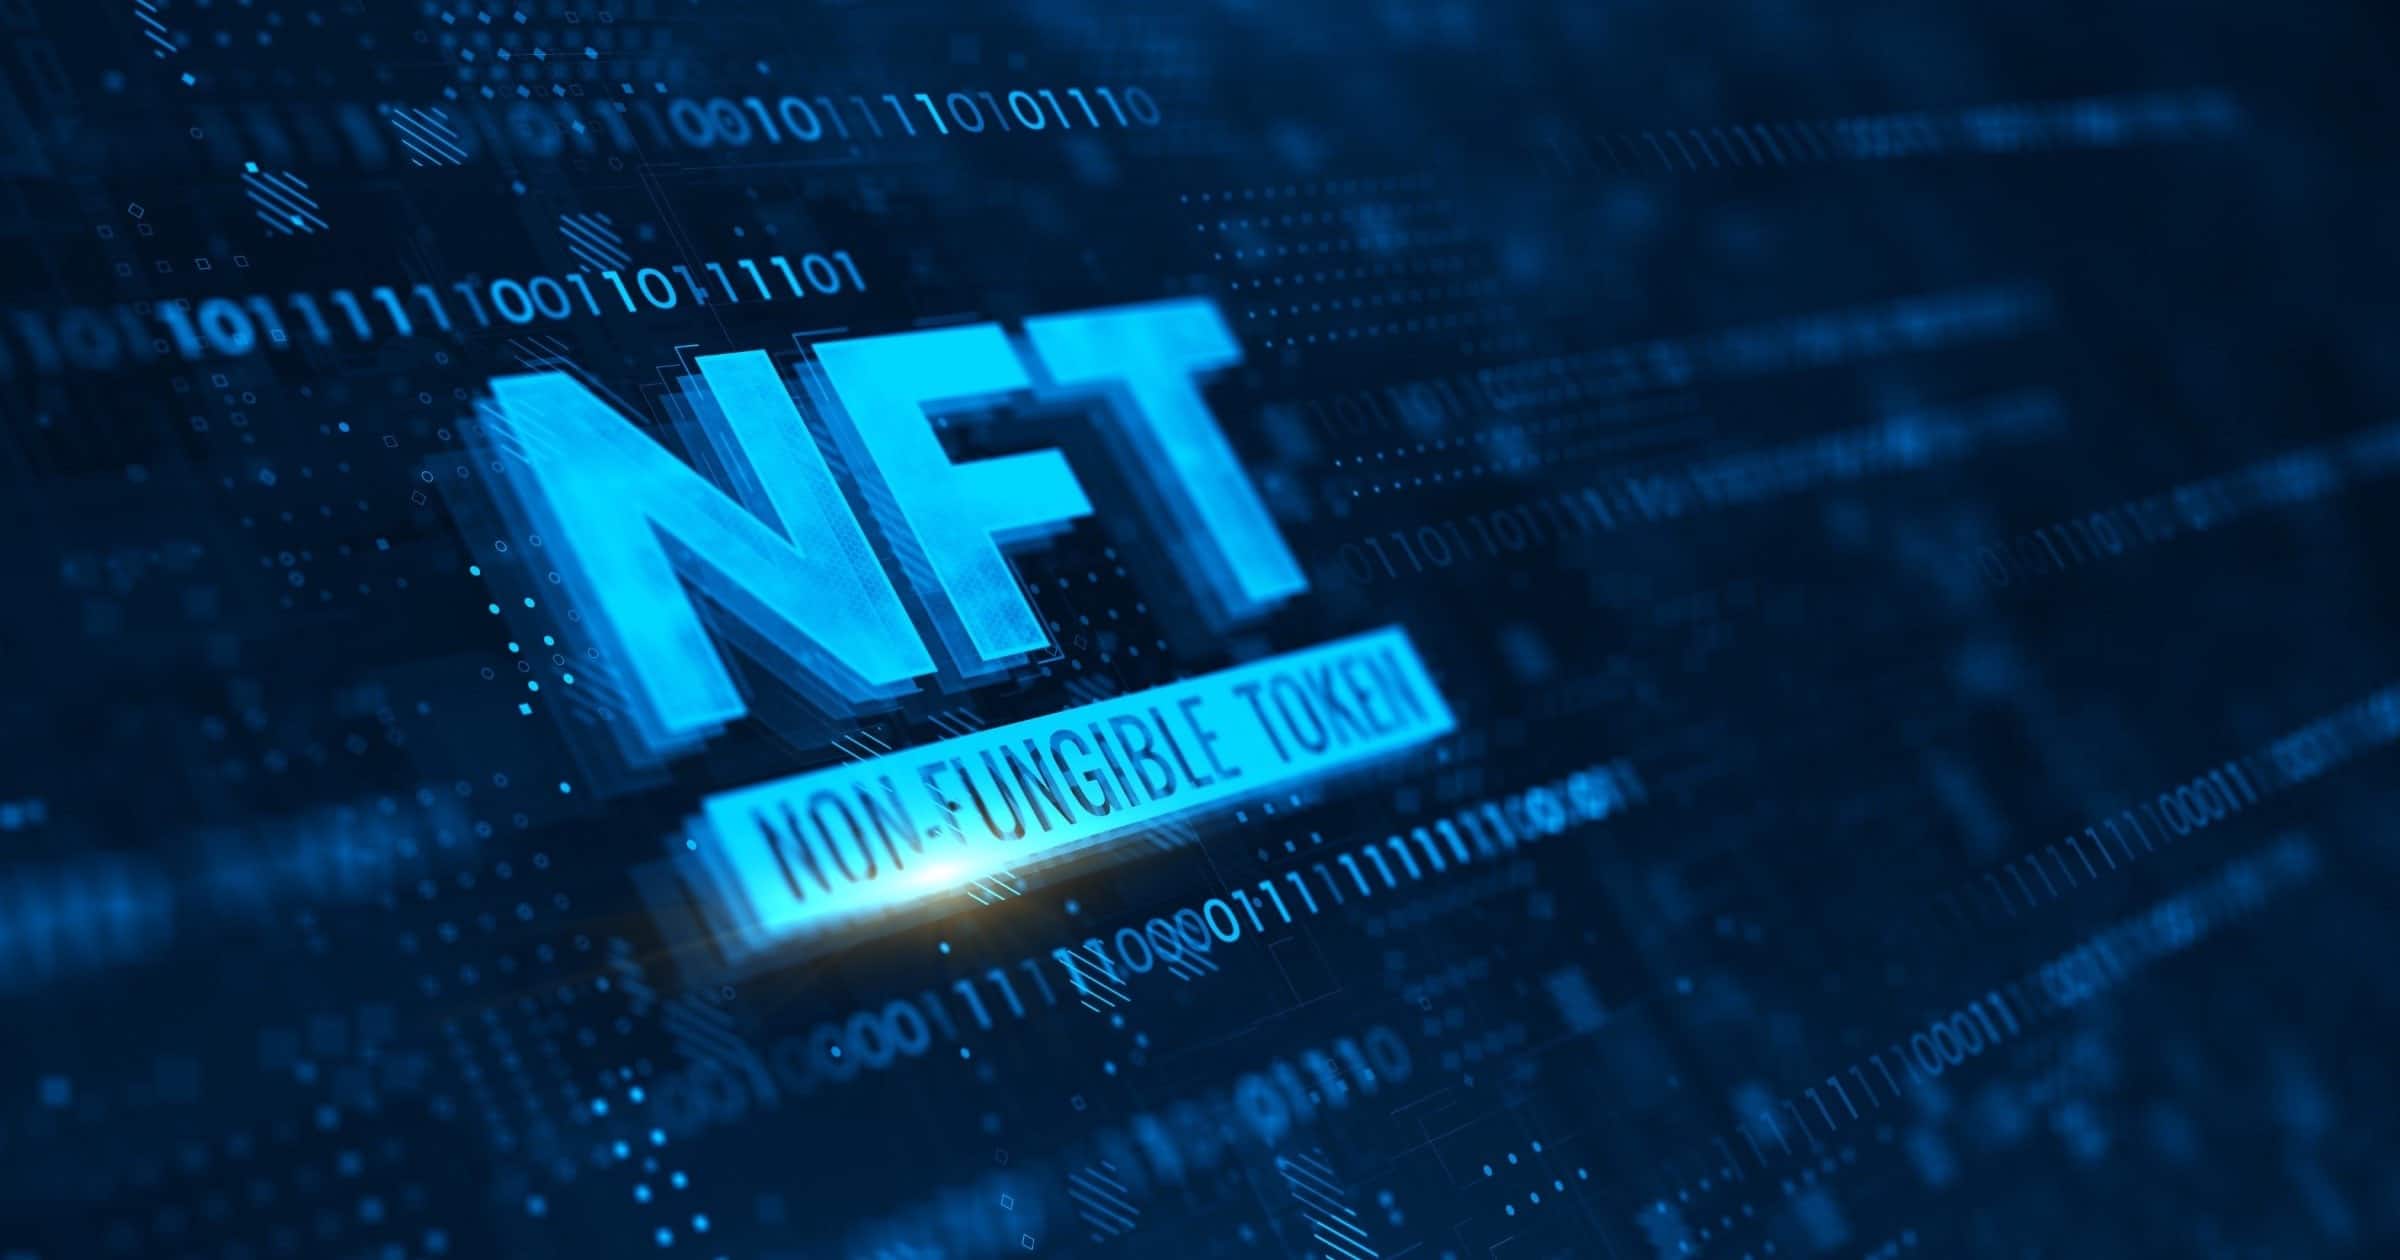 An NFT on OpenSea Can Steal Your IP Address